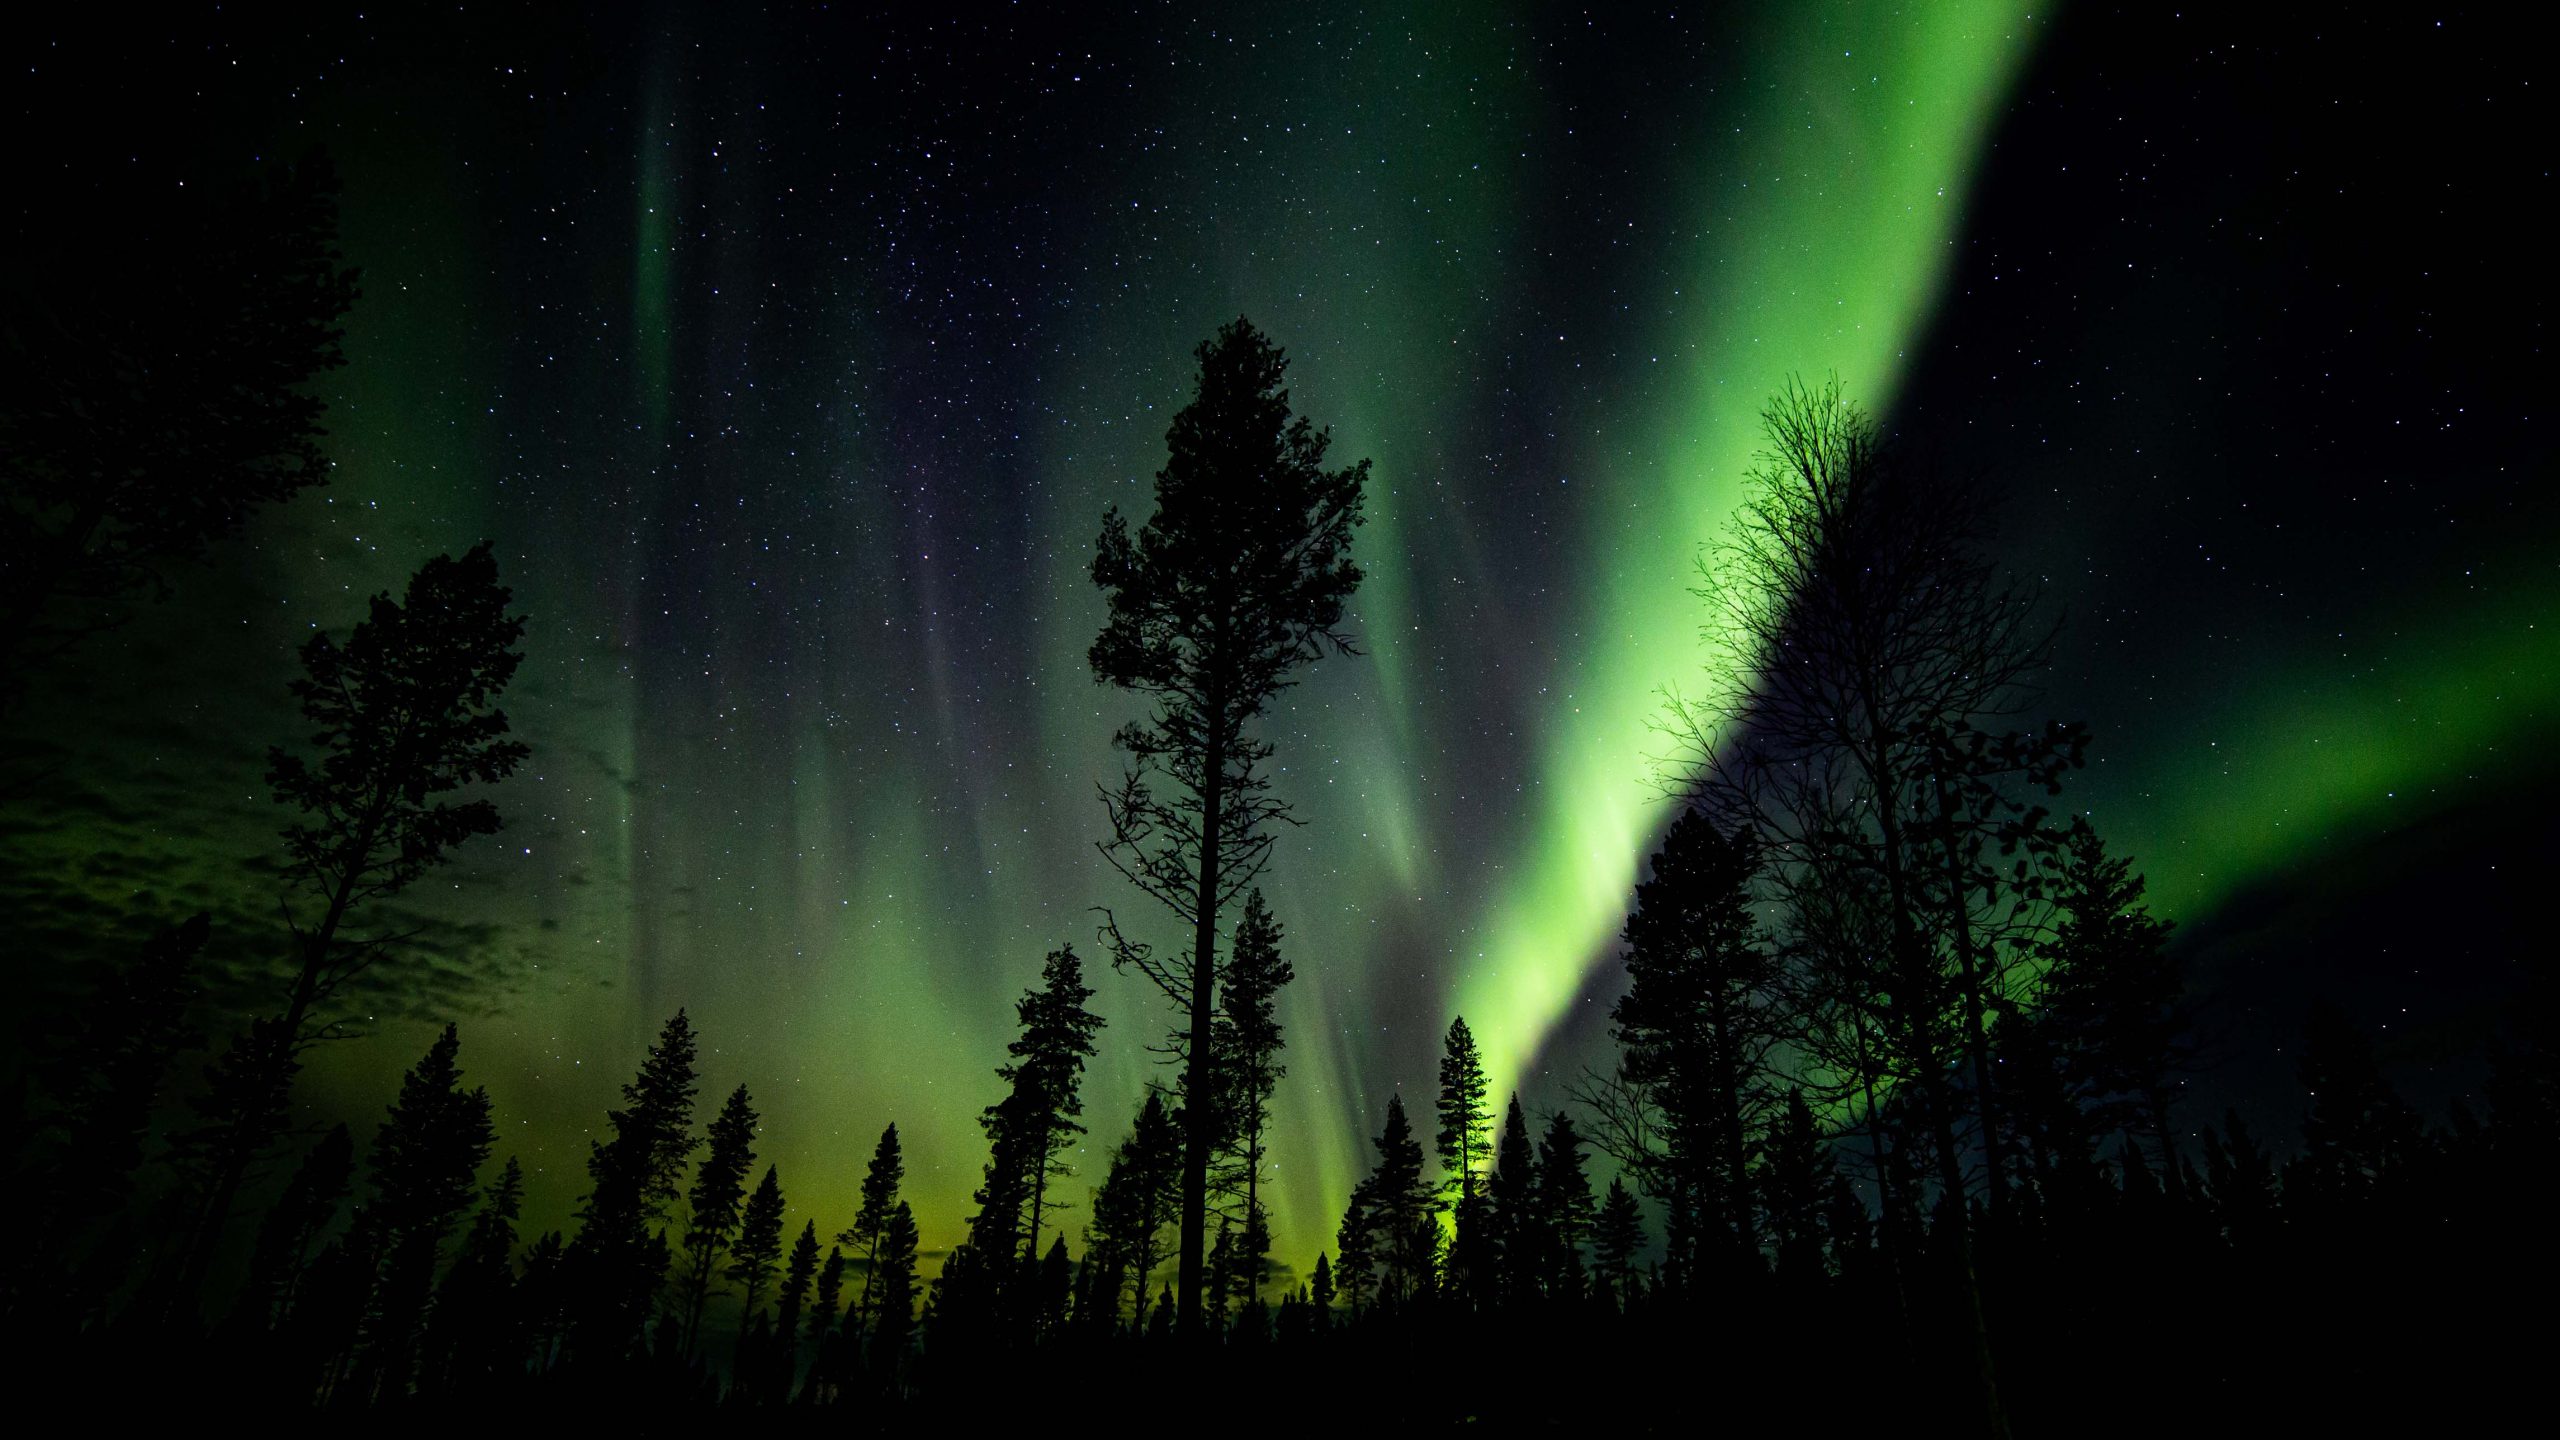 Hunting for the northern lights activity | Arctic TreeHouse Hotel